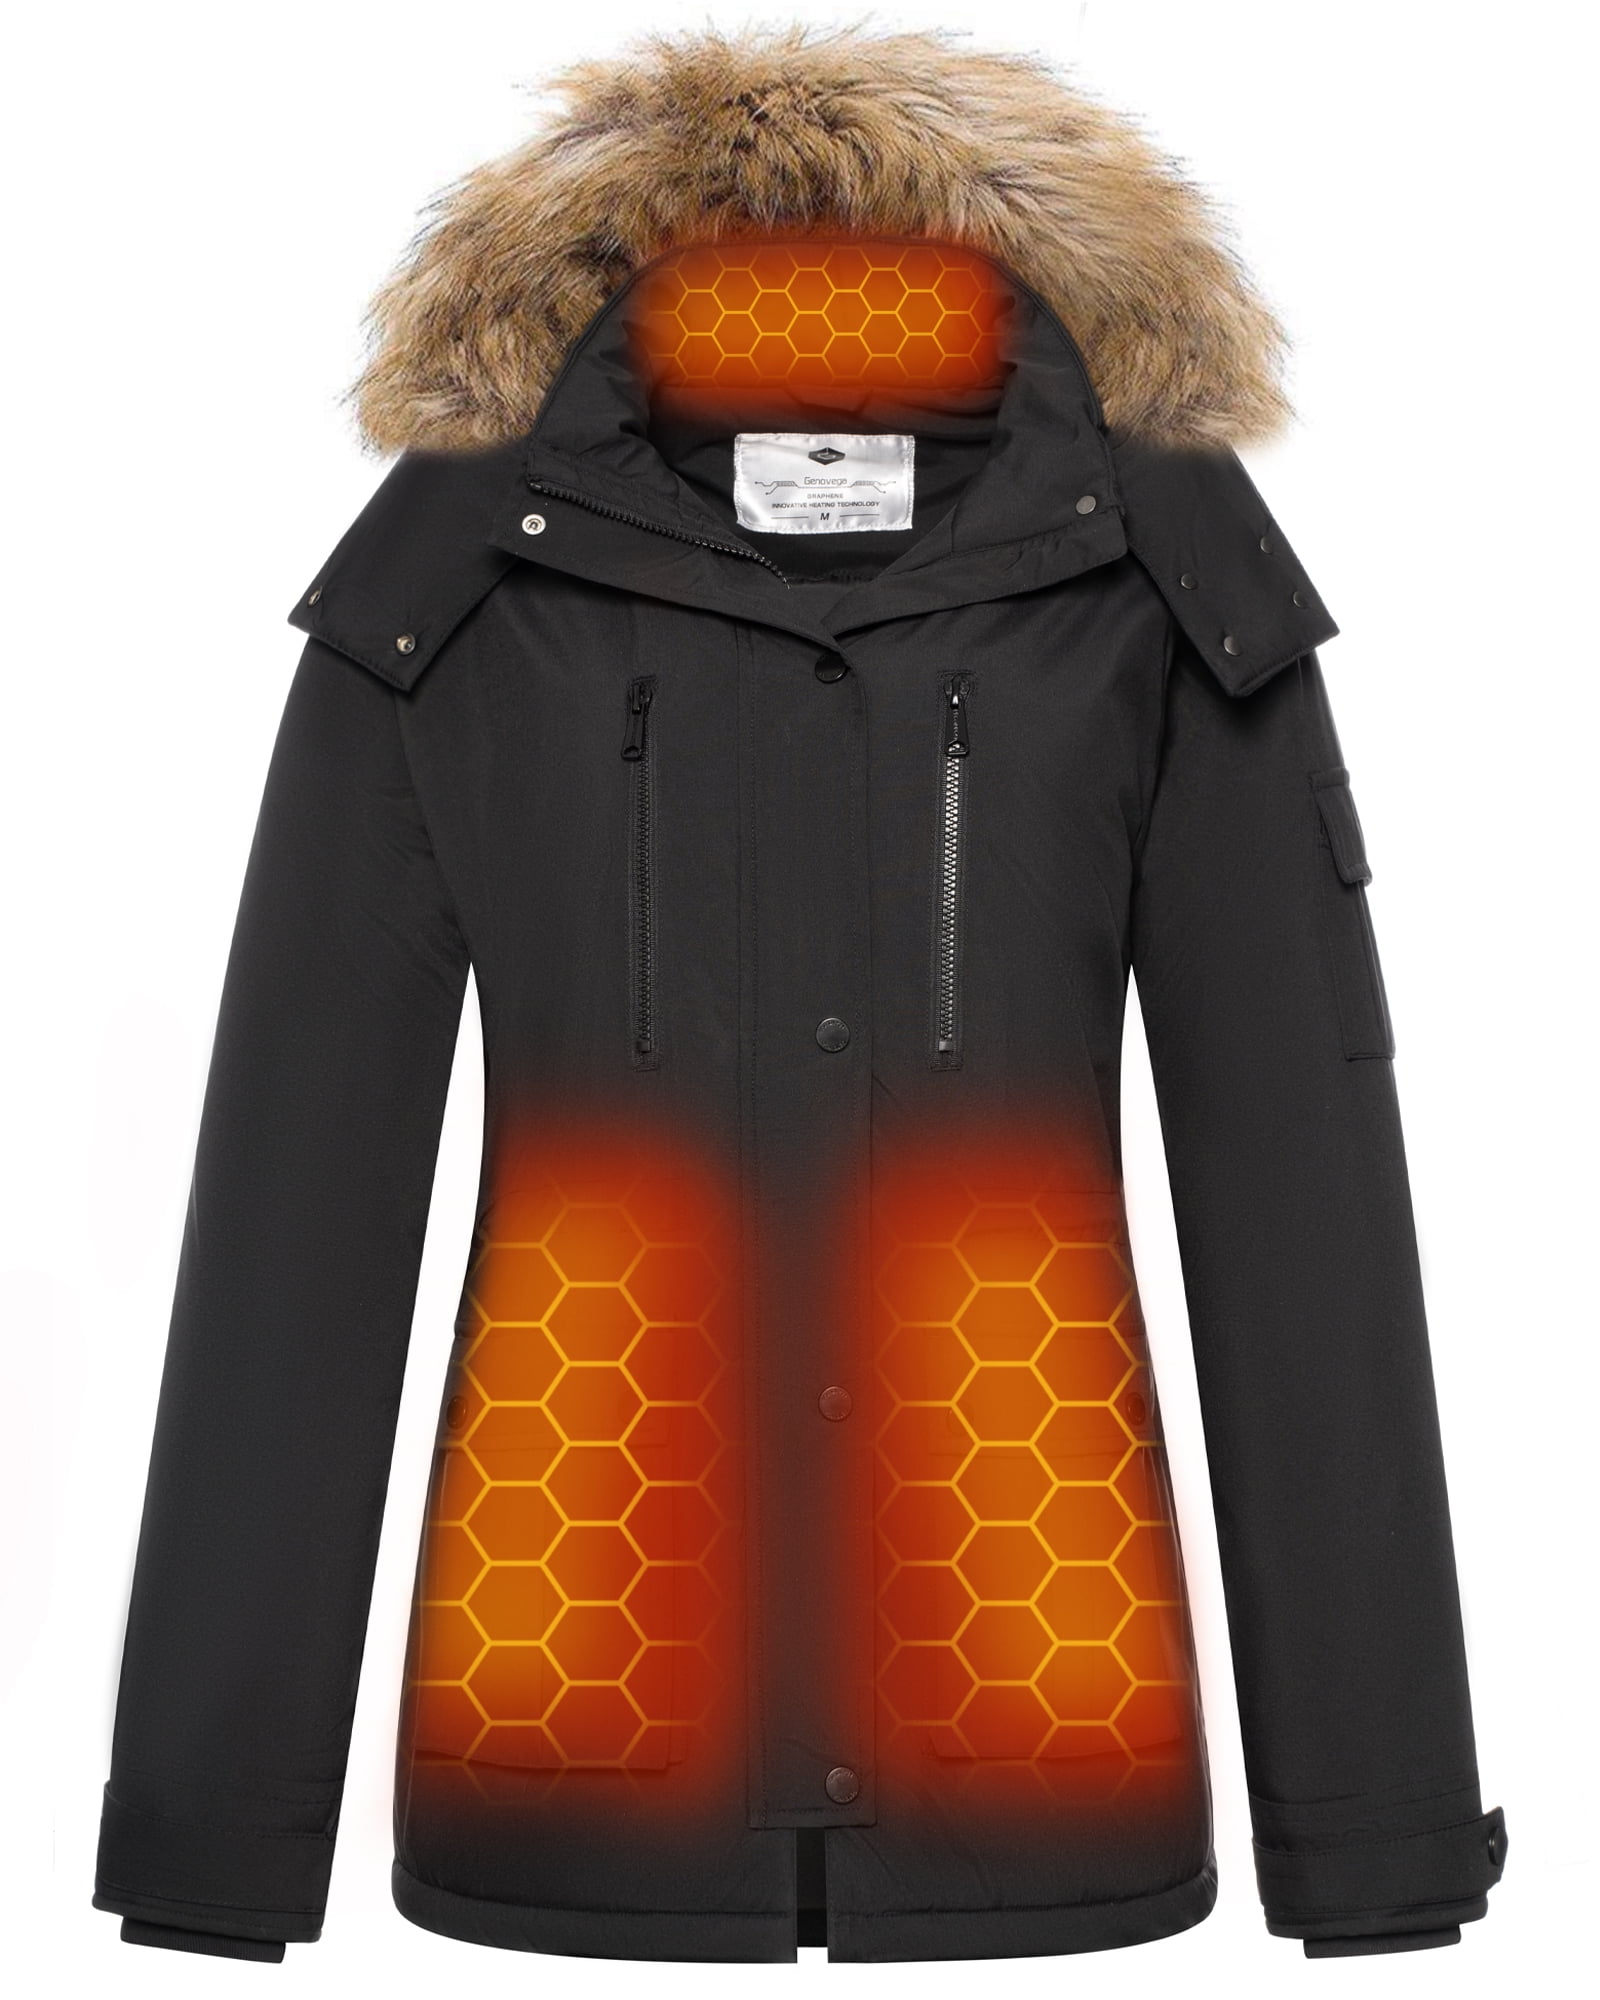 Genovega Down Heated Jacket for Women with 7.4V Battery Pack, 6 ...